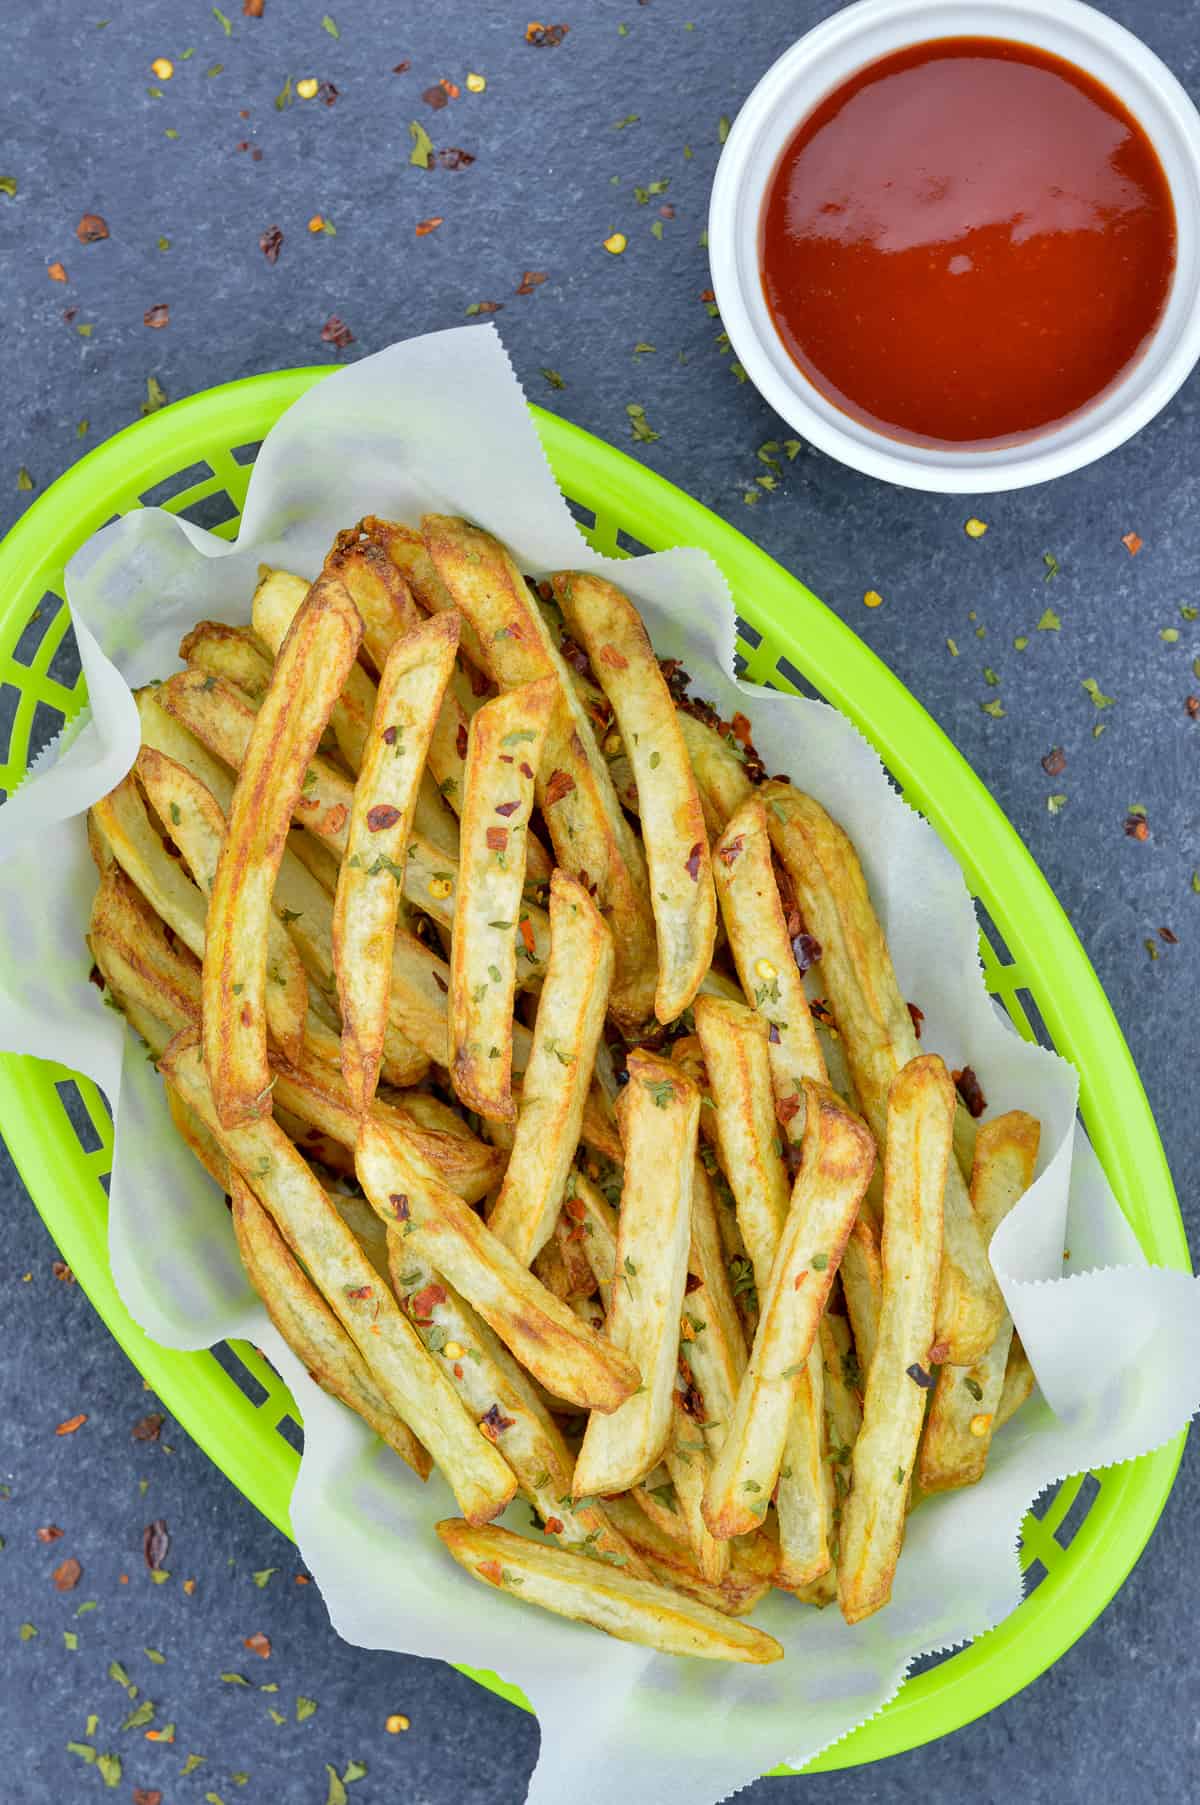 air fried french fries in a green fast food serving basket, with a small bowl of ketchup on the side